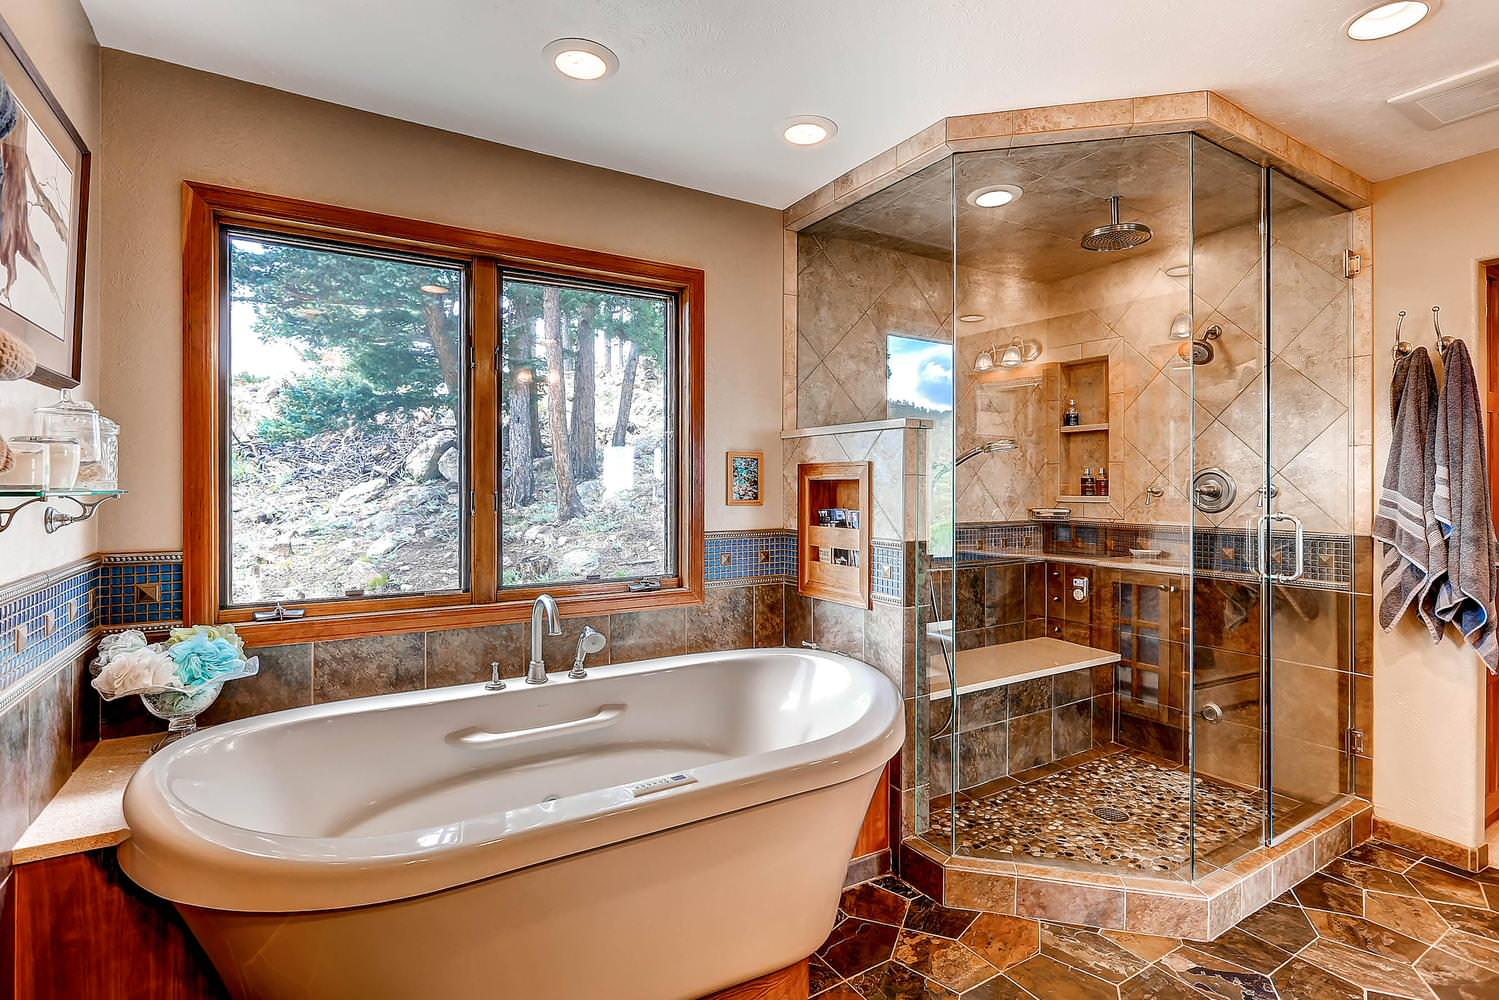 https://st.hzcdn.com/simgs/pictures/bathrooms/mountain-views-from-this-spa-like-master-bath-christopher-s-kitchen-and-bath-img~dde1ffb80744979e_16-9534-1-ed61fc5.jpg